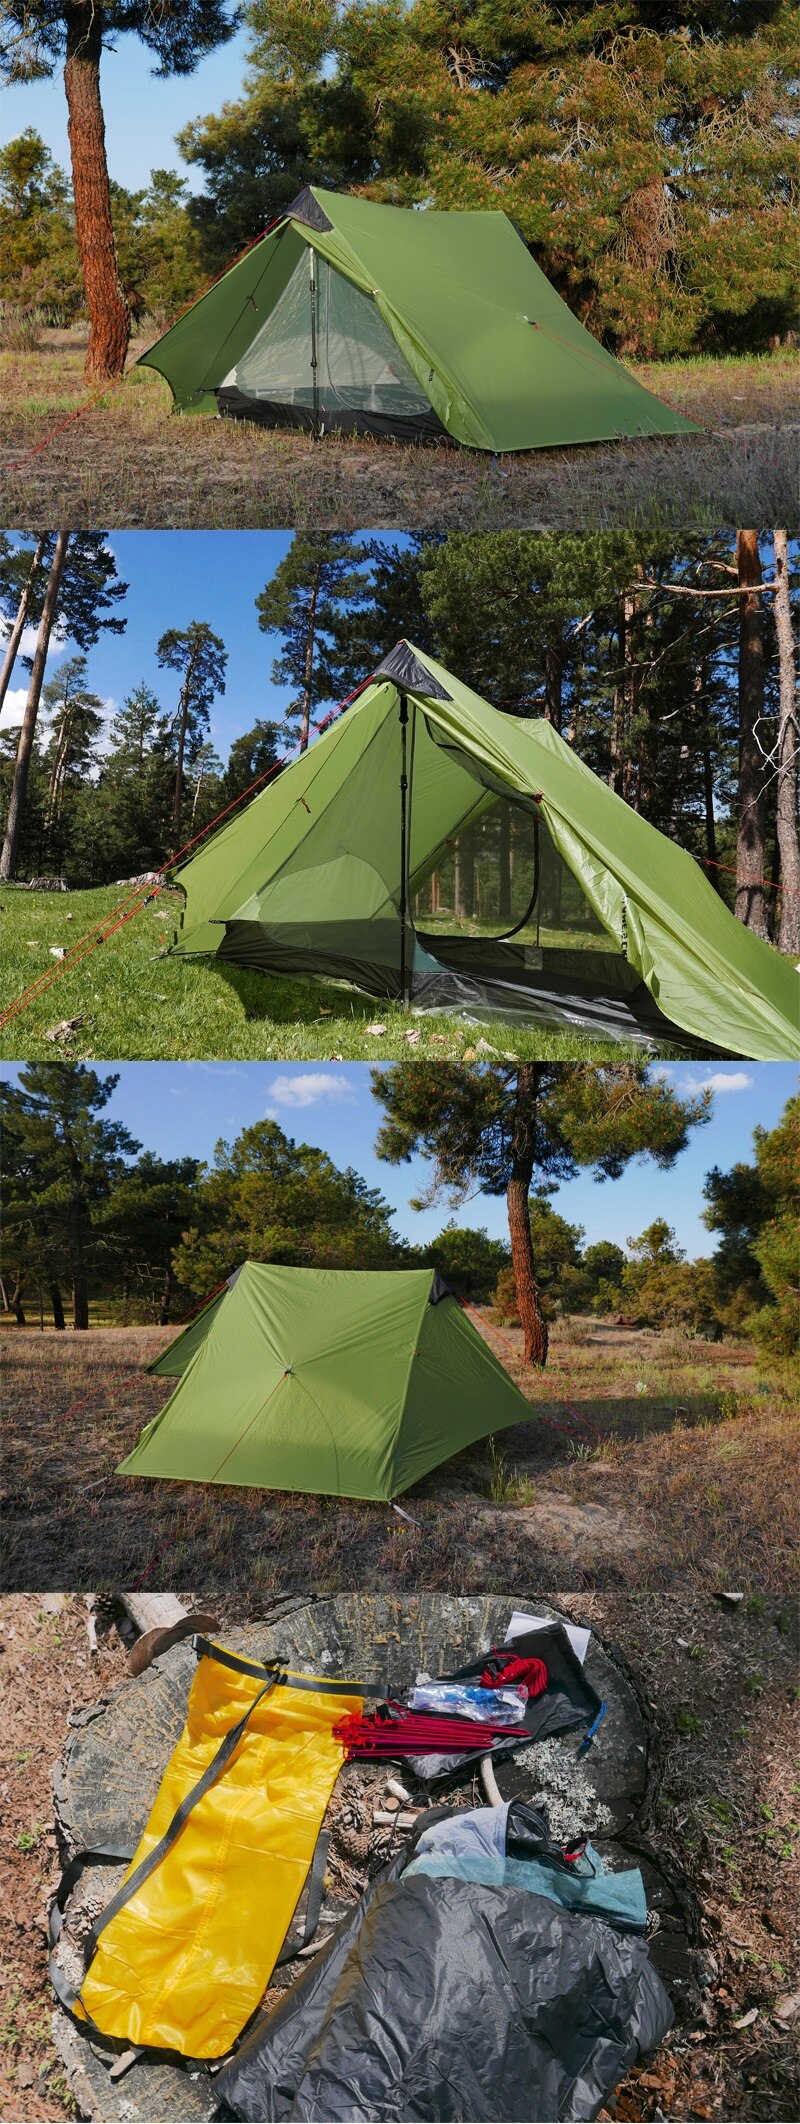 2021 New Version FLAME'S CREED LanShan 2 Person Oudoor Ultralight Camping Tent 3 Season Professional 15D Silnylon Rodless Tent